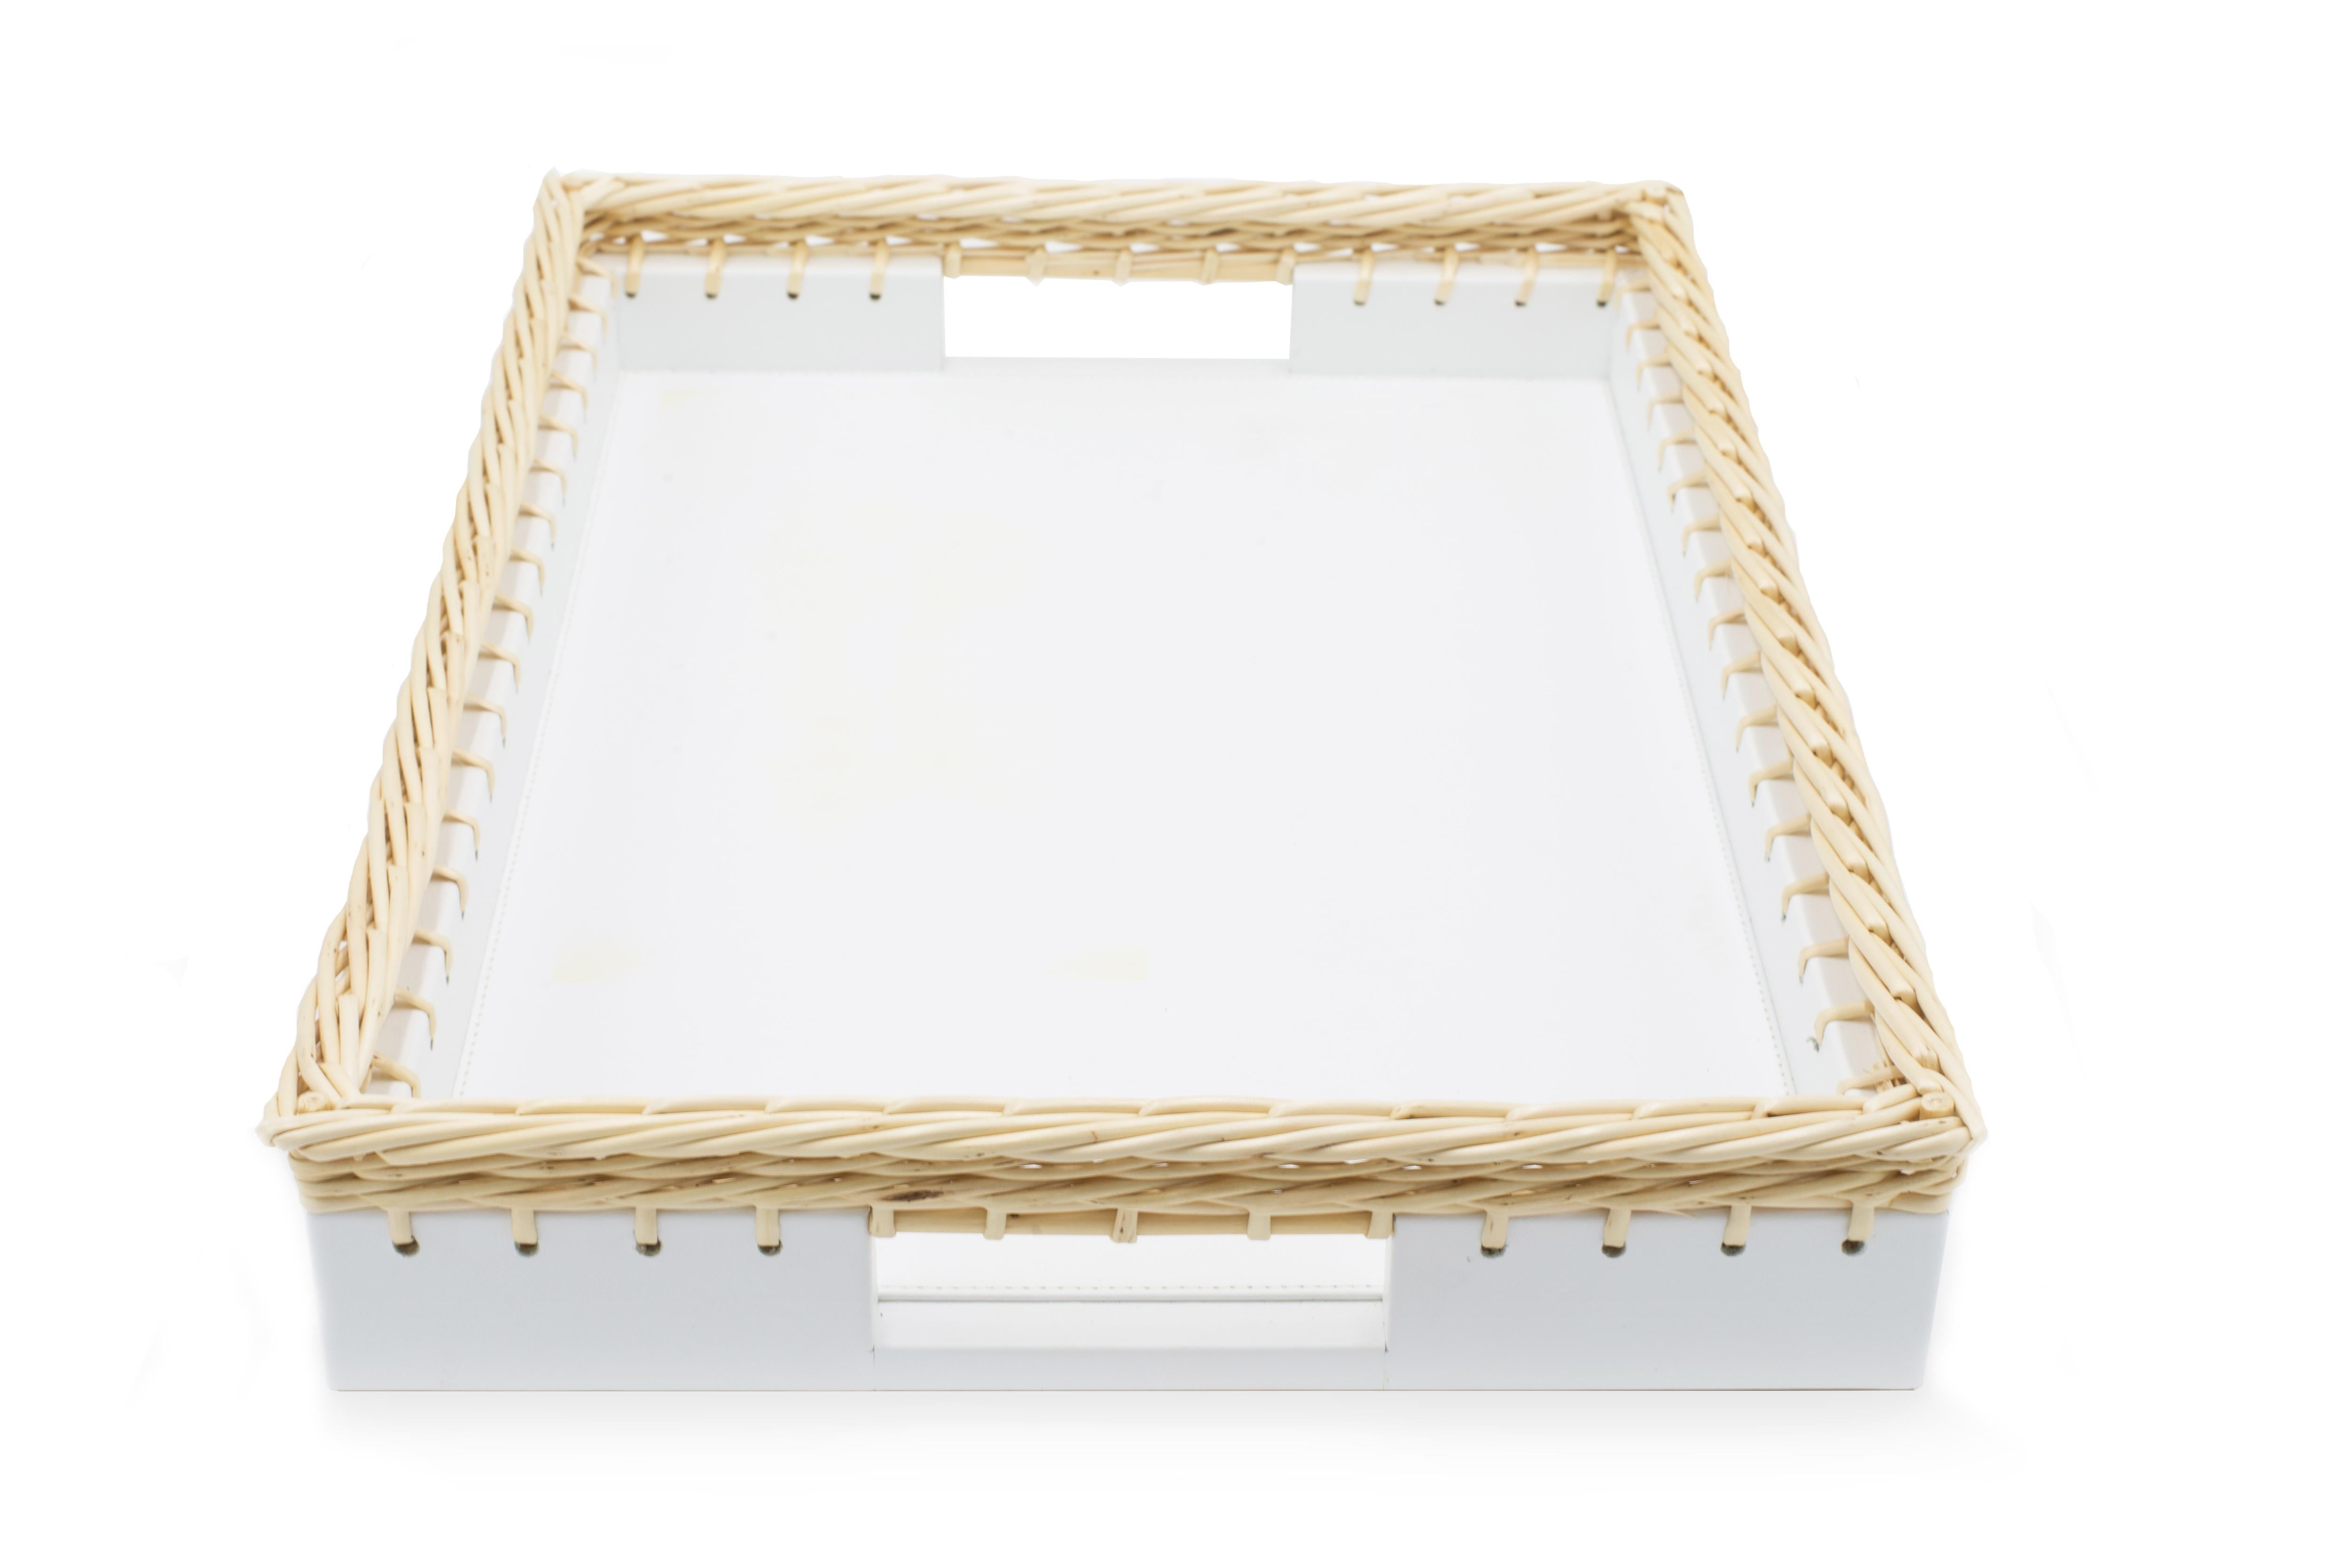 Contemporary Italian White Leather and Wicker Tray In Good Condition For Sale In New York, NY